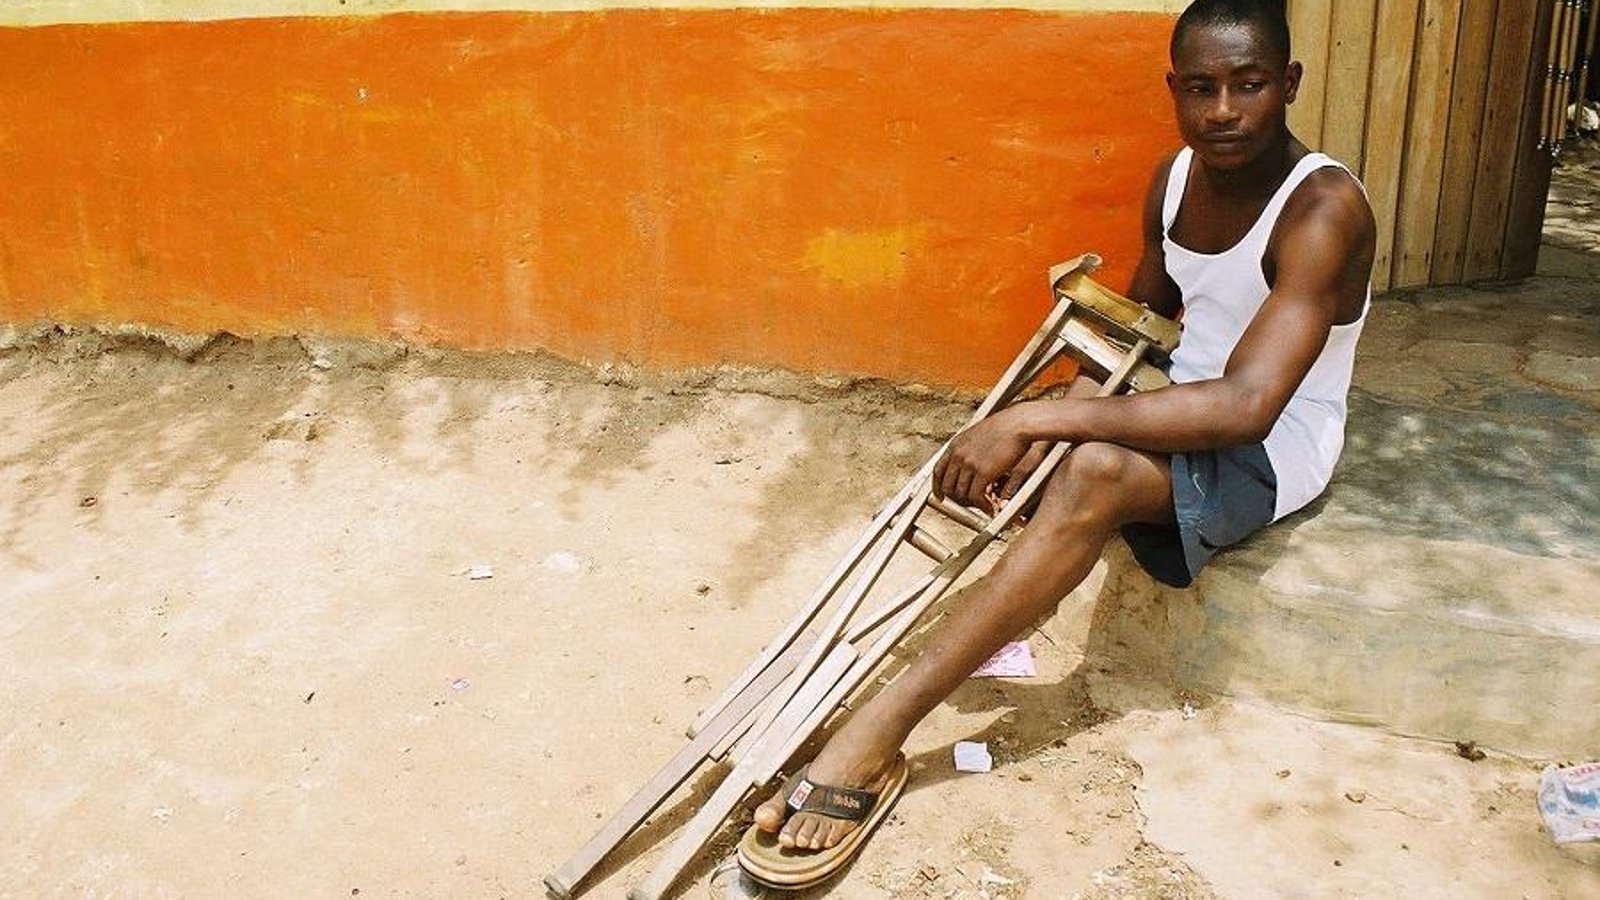 Emmanuel's Gift - A Man with a Physical Handicap Attempts to Destigmatize Disabilities in Ghana